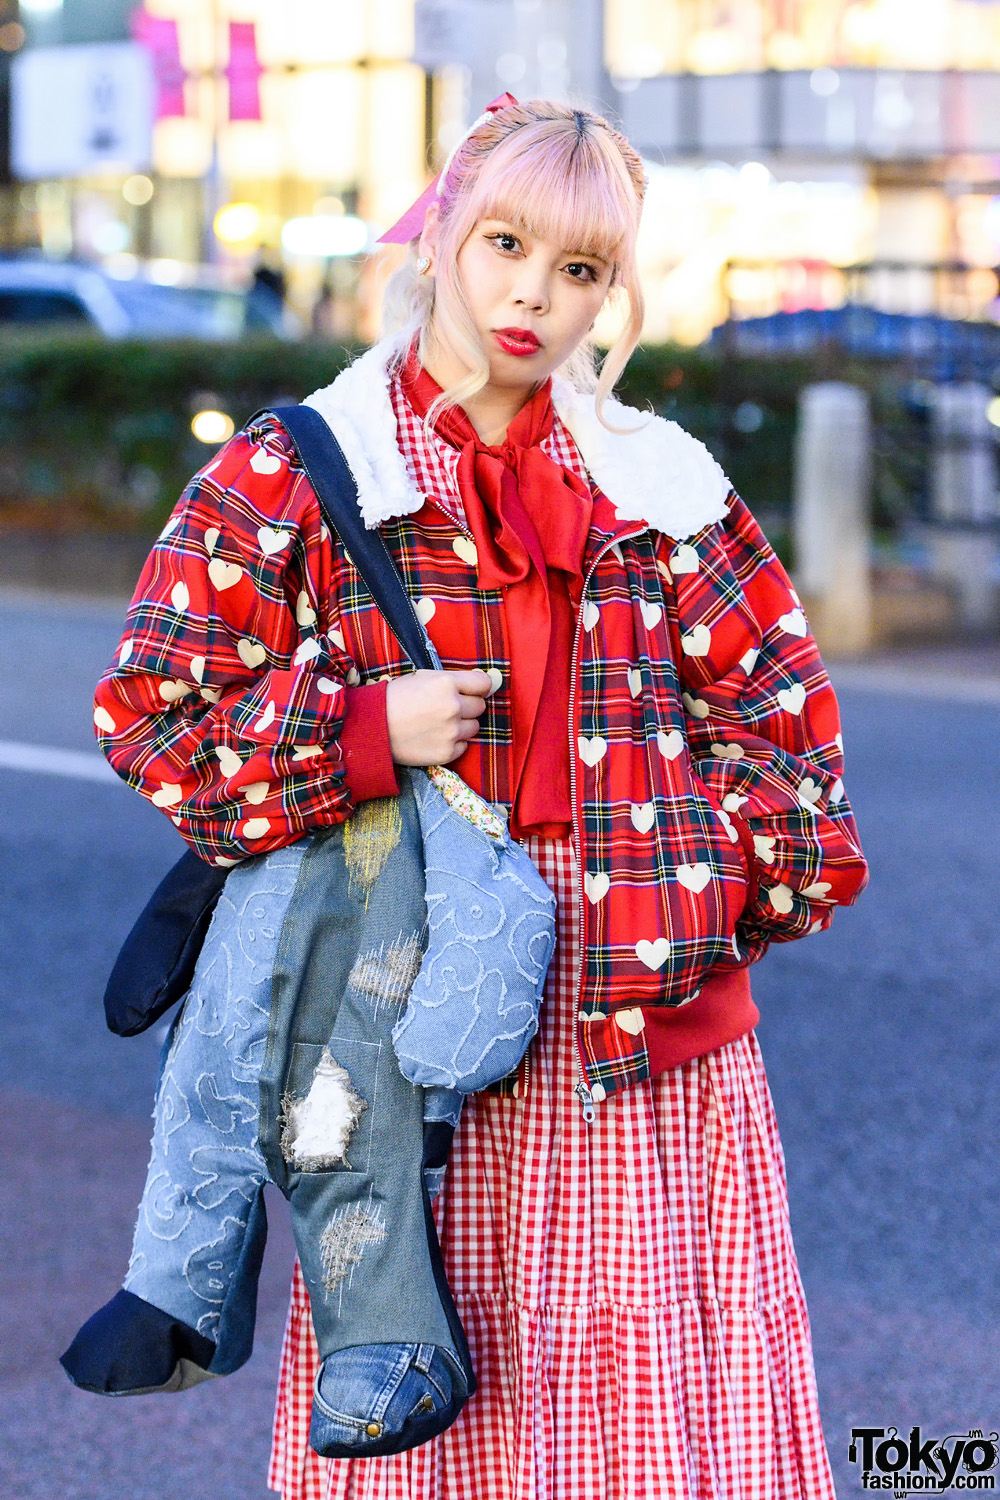 Red HEIHEI Streetwear Style w/ Ombre Pink Hair, Gingham Dress, Plaid ...